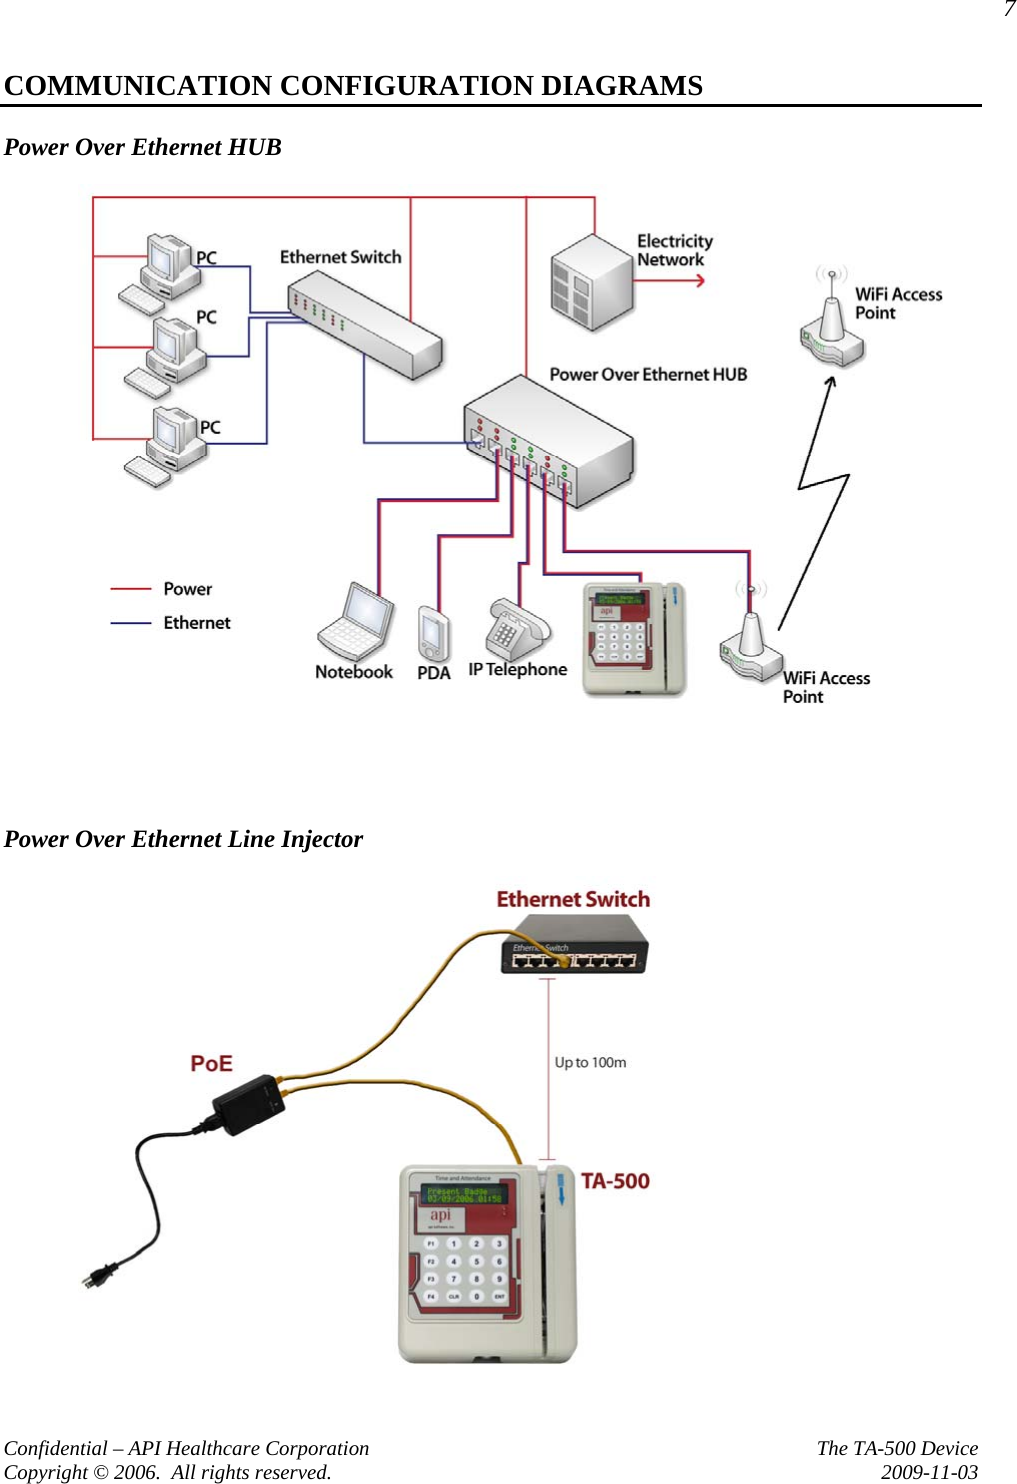 7 Confidential – API Healthcare Corporation    The TA-500 Device Copyright © 2006.  All rights reserved.  2009-11-03  COMMUNICATION CONFIGURATION DIAGRAMS Power Over Ethernet HUB       Power Over Ethernet Line Injector    